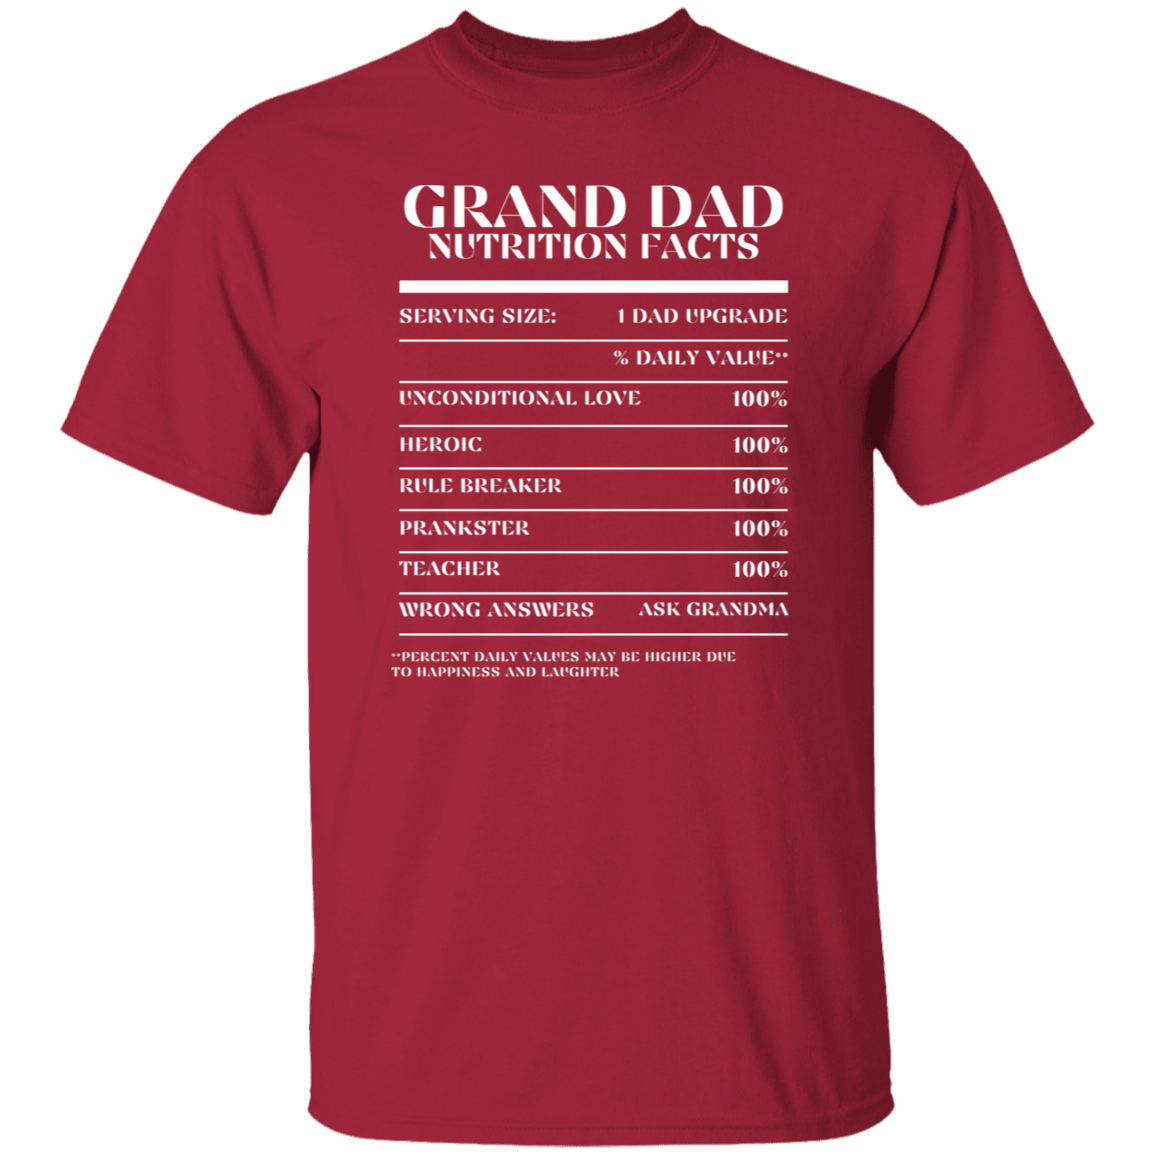 Nutrition Facts T-Shirt SS - Grand Dad - White